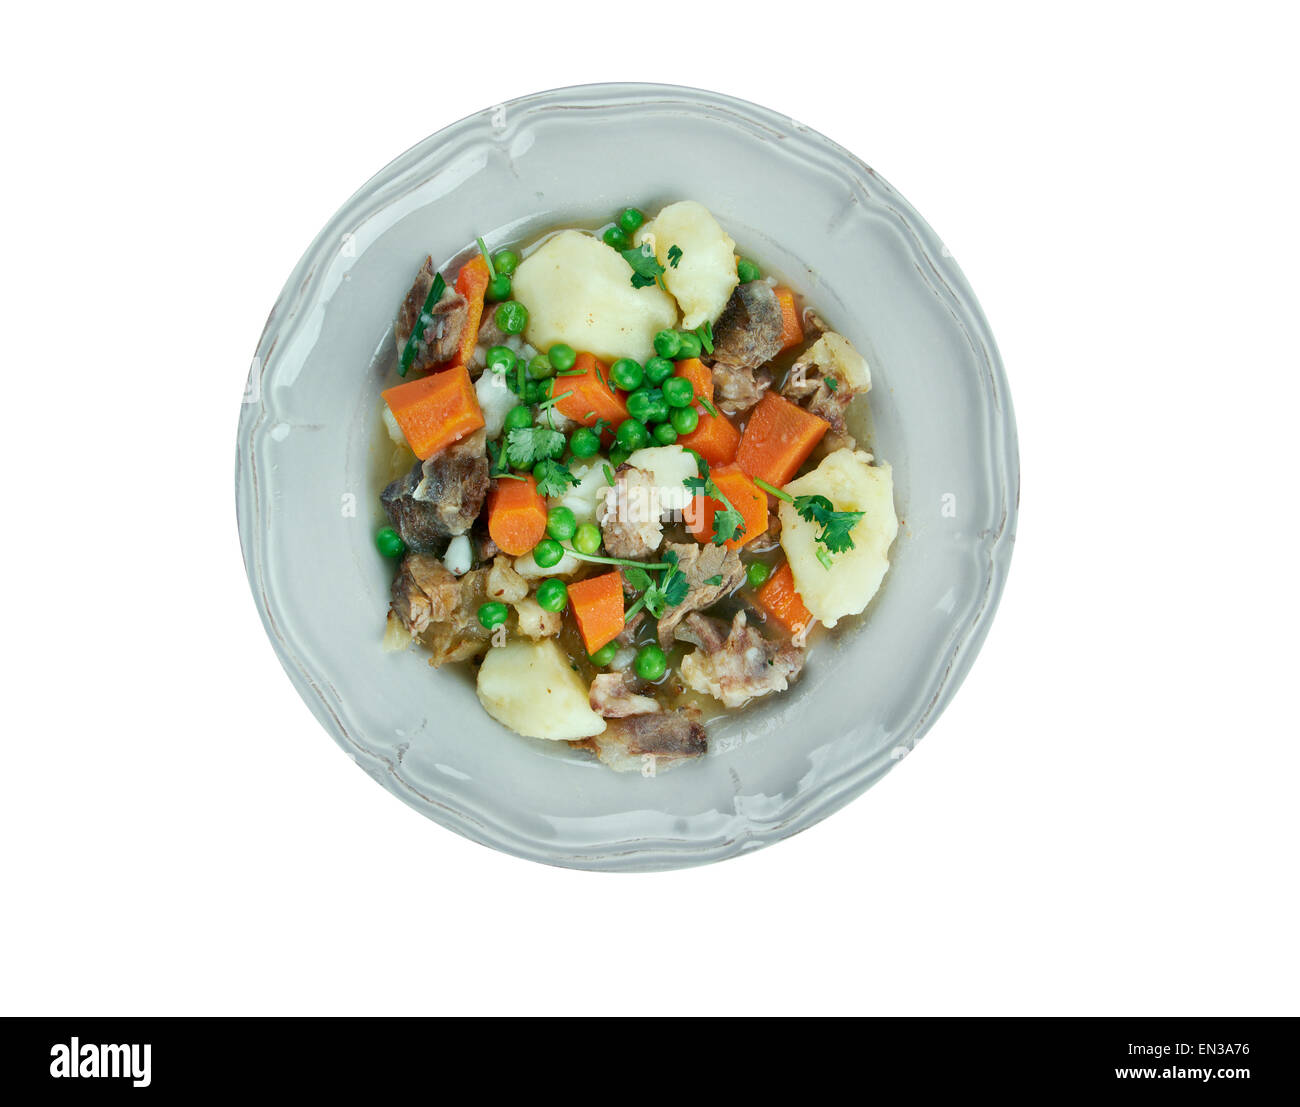 Pichelsteiner   -  German stew that contains several kinds of meat and vegetables. Stock Photo